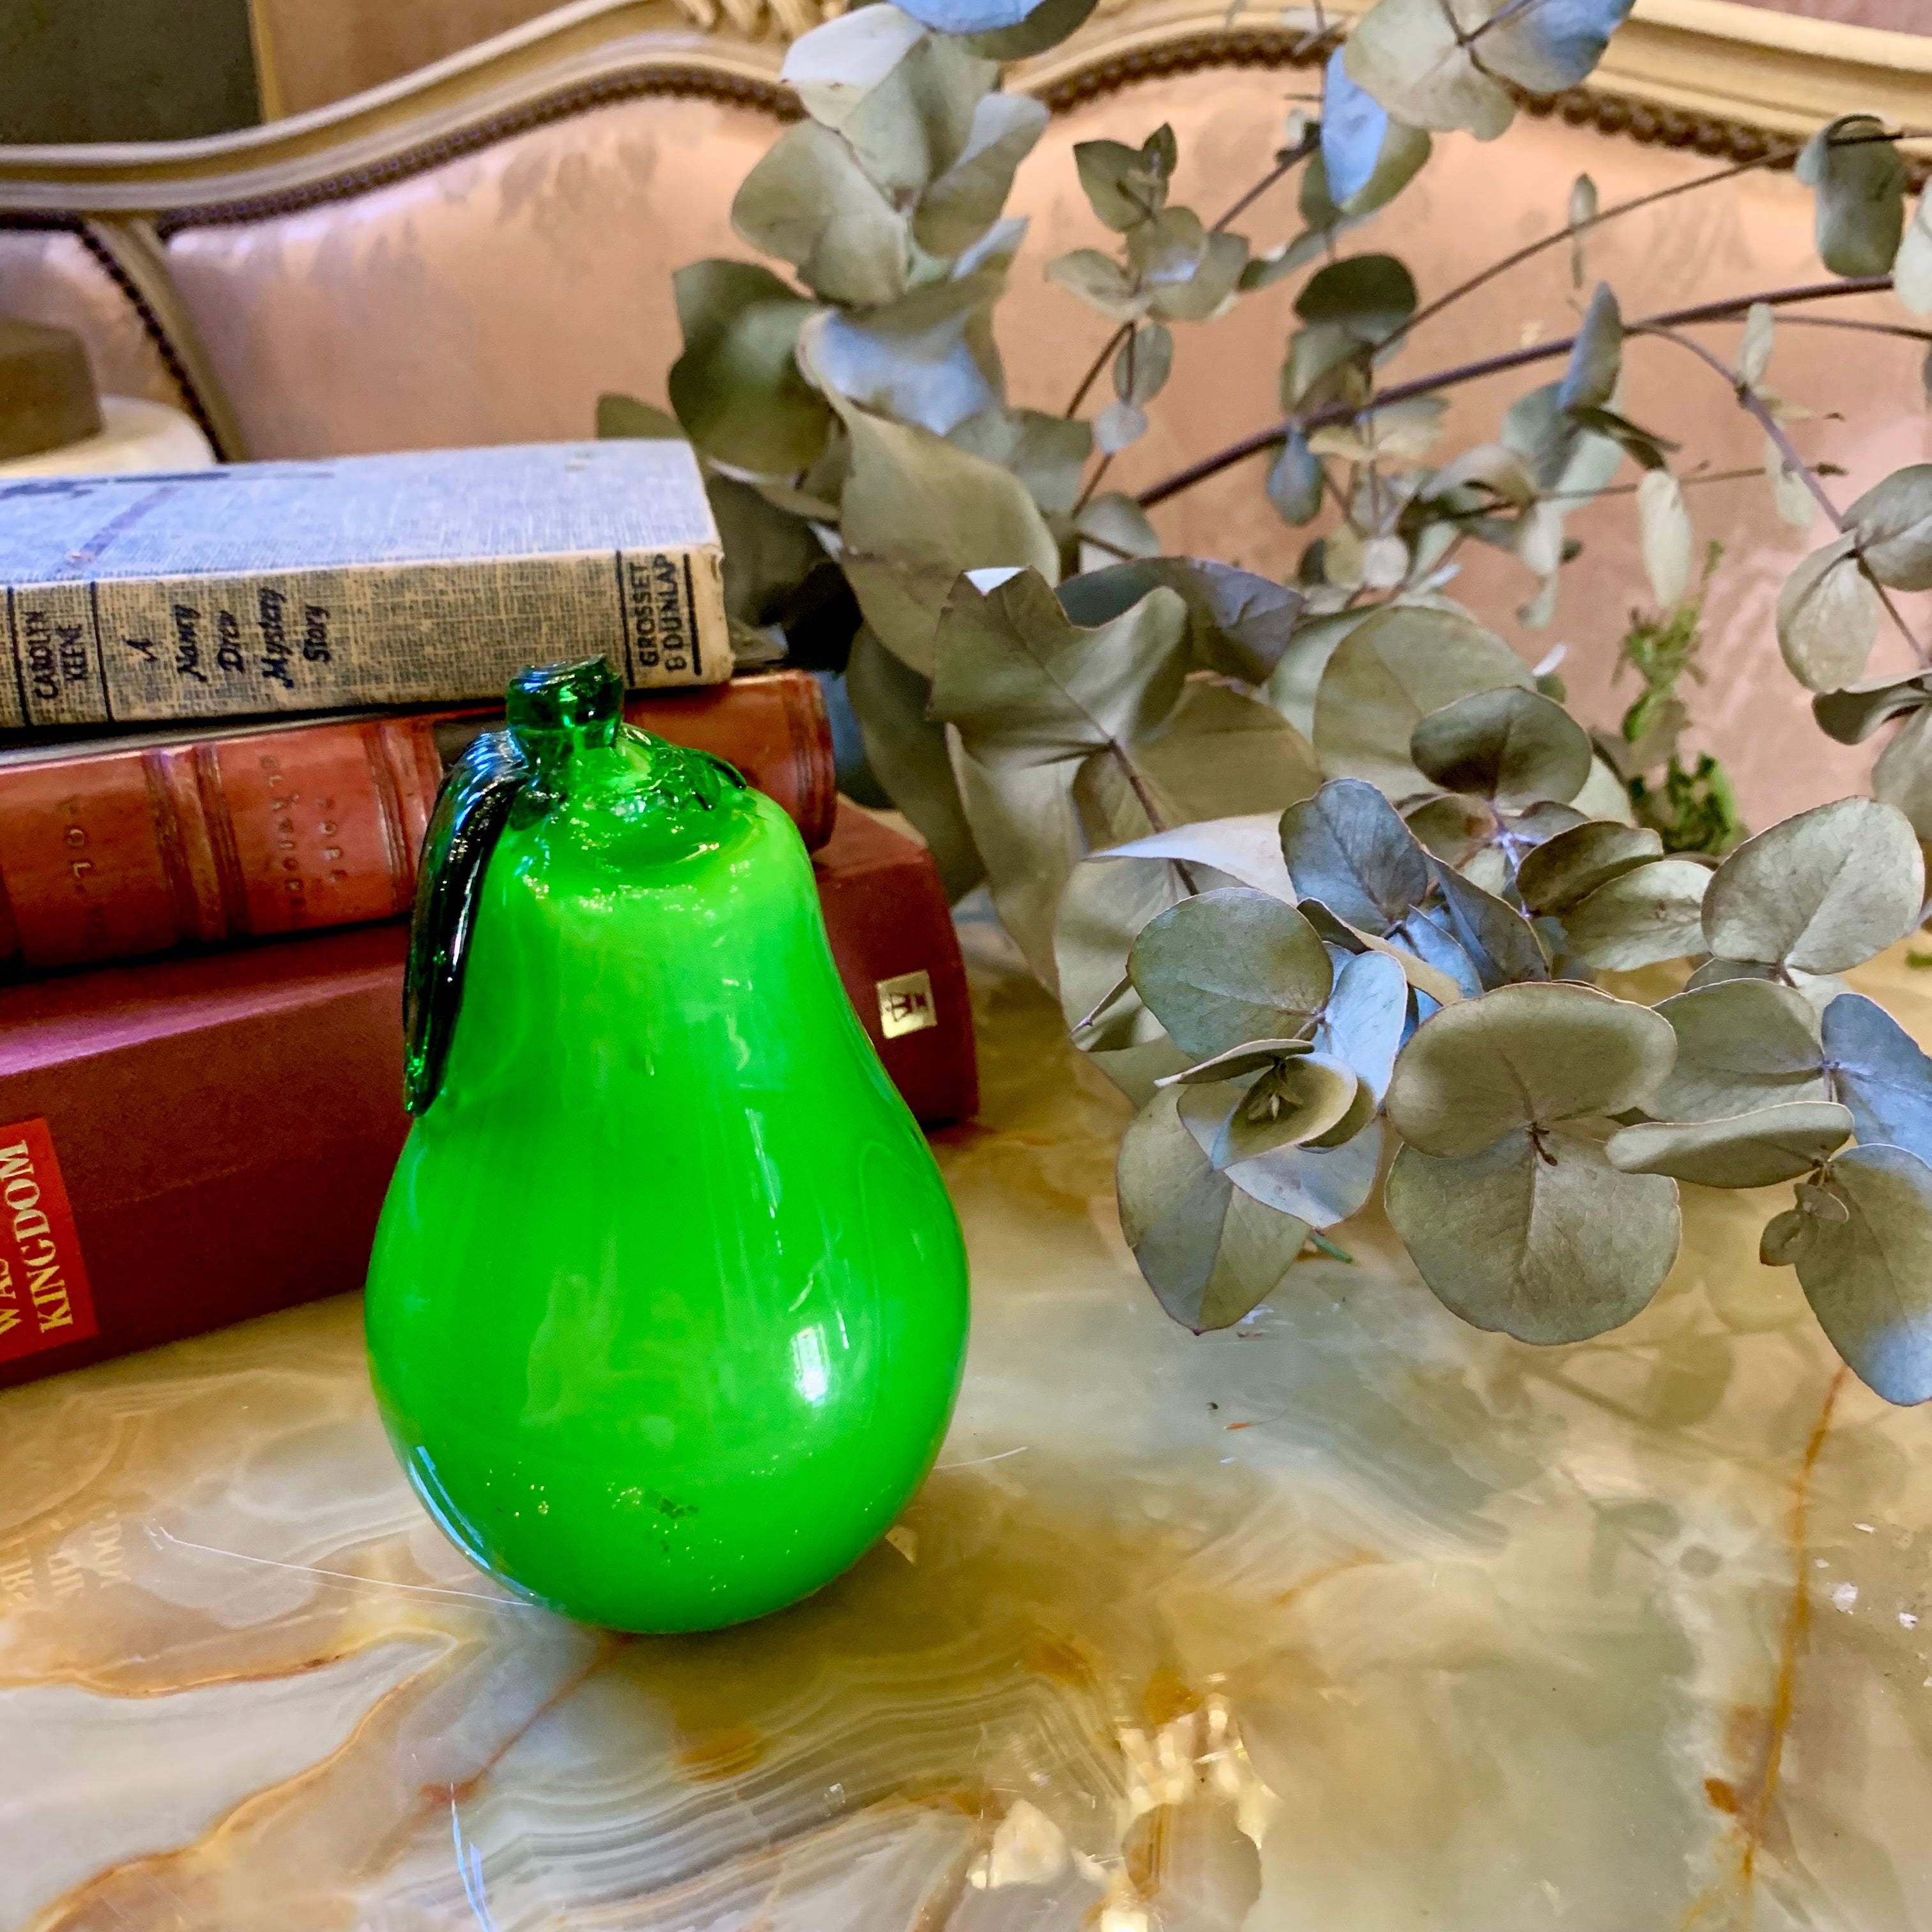 Pair of Green Apple and Pear Murano Ornament